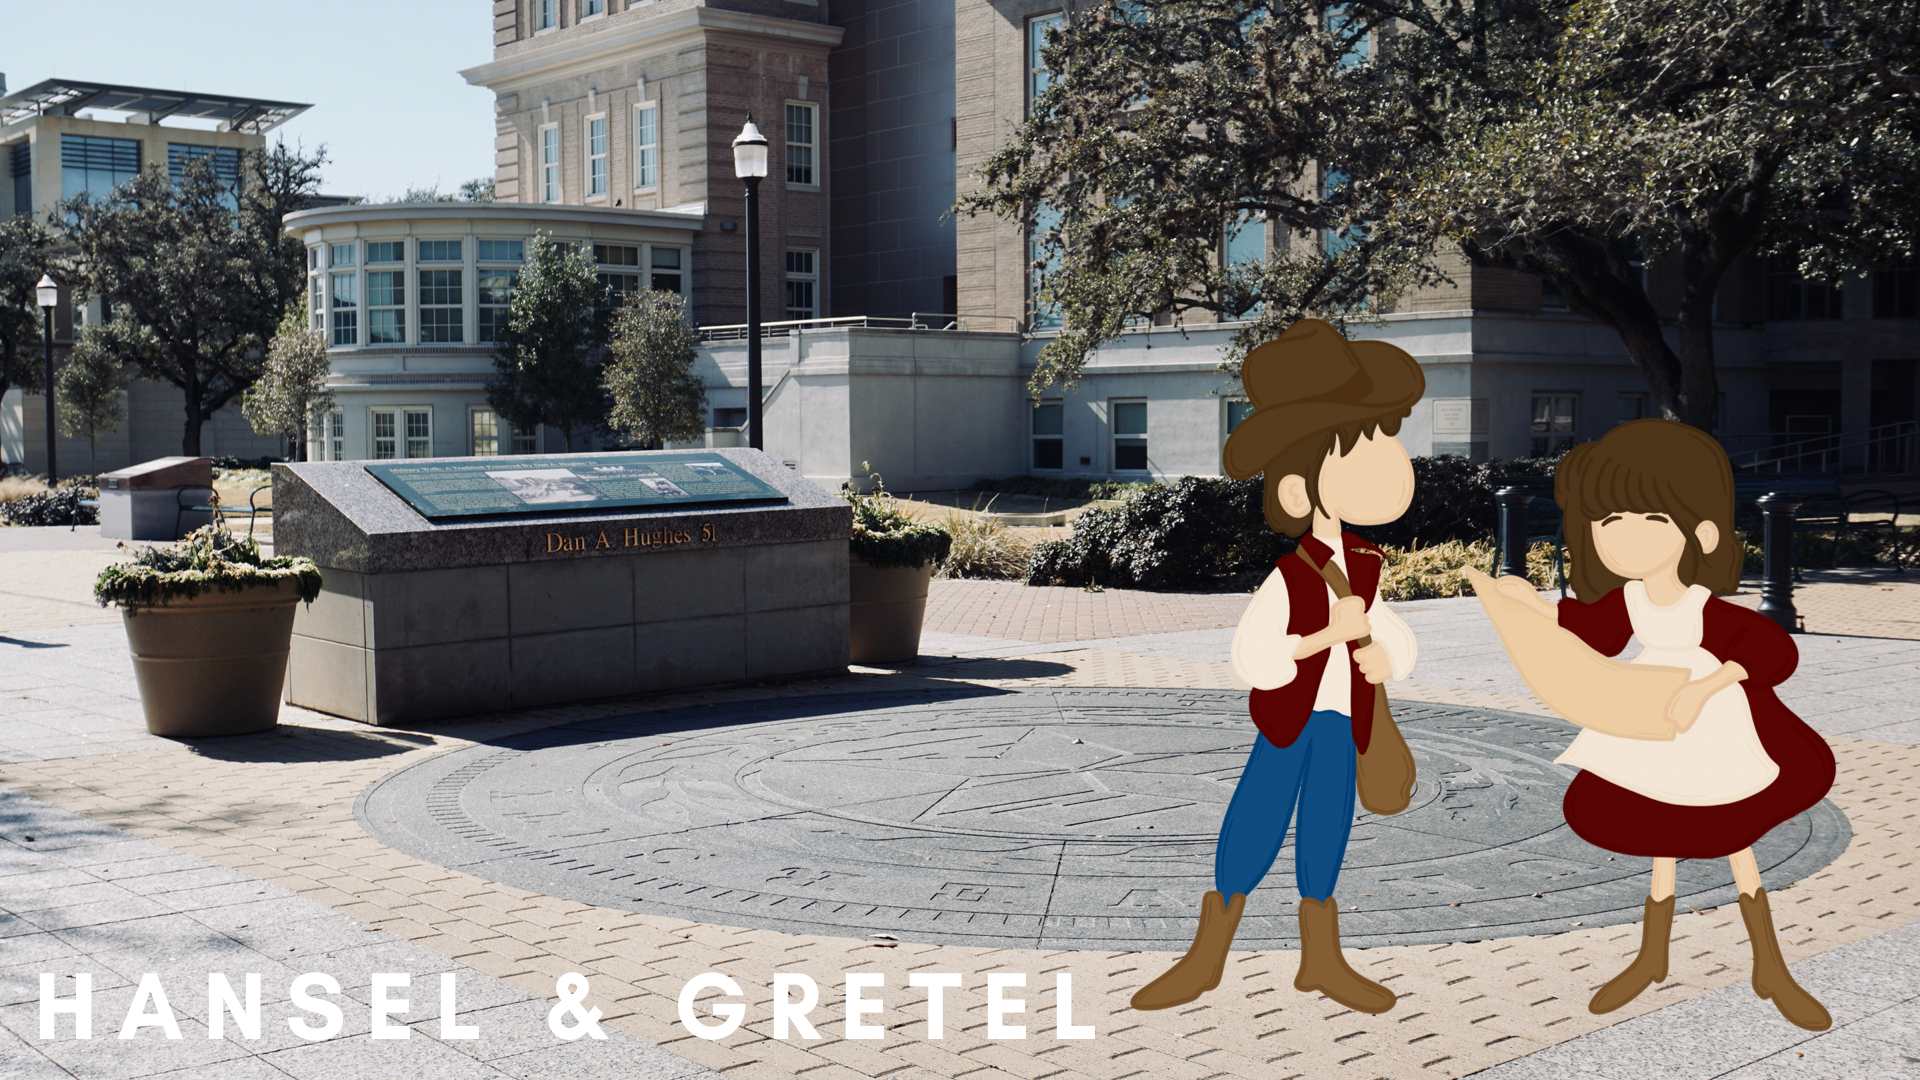 Hansel and Gretel study a map of campus.